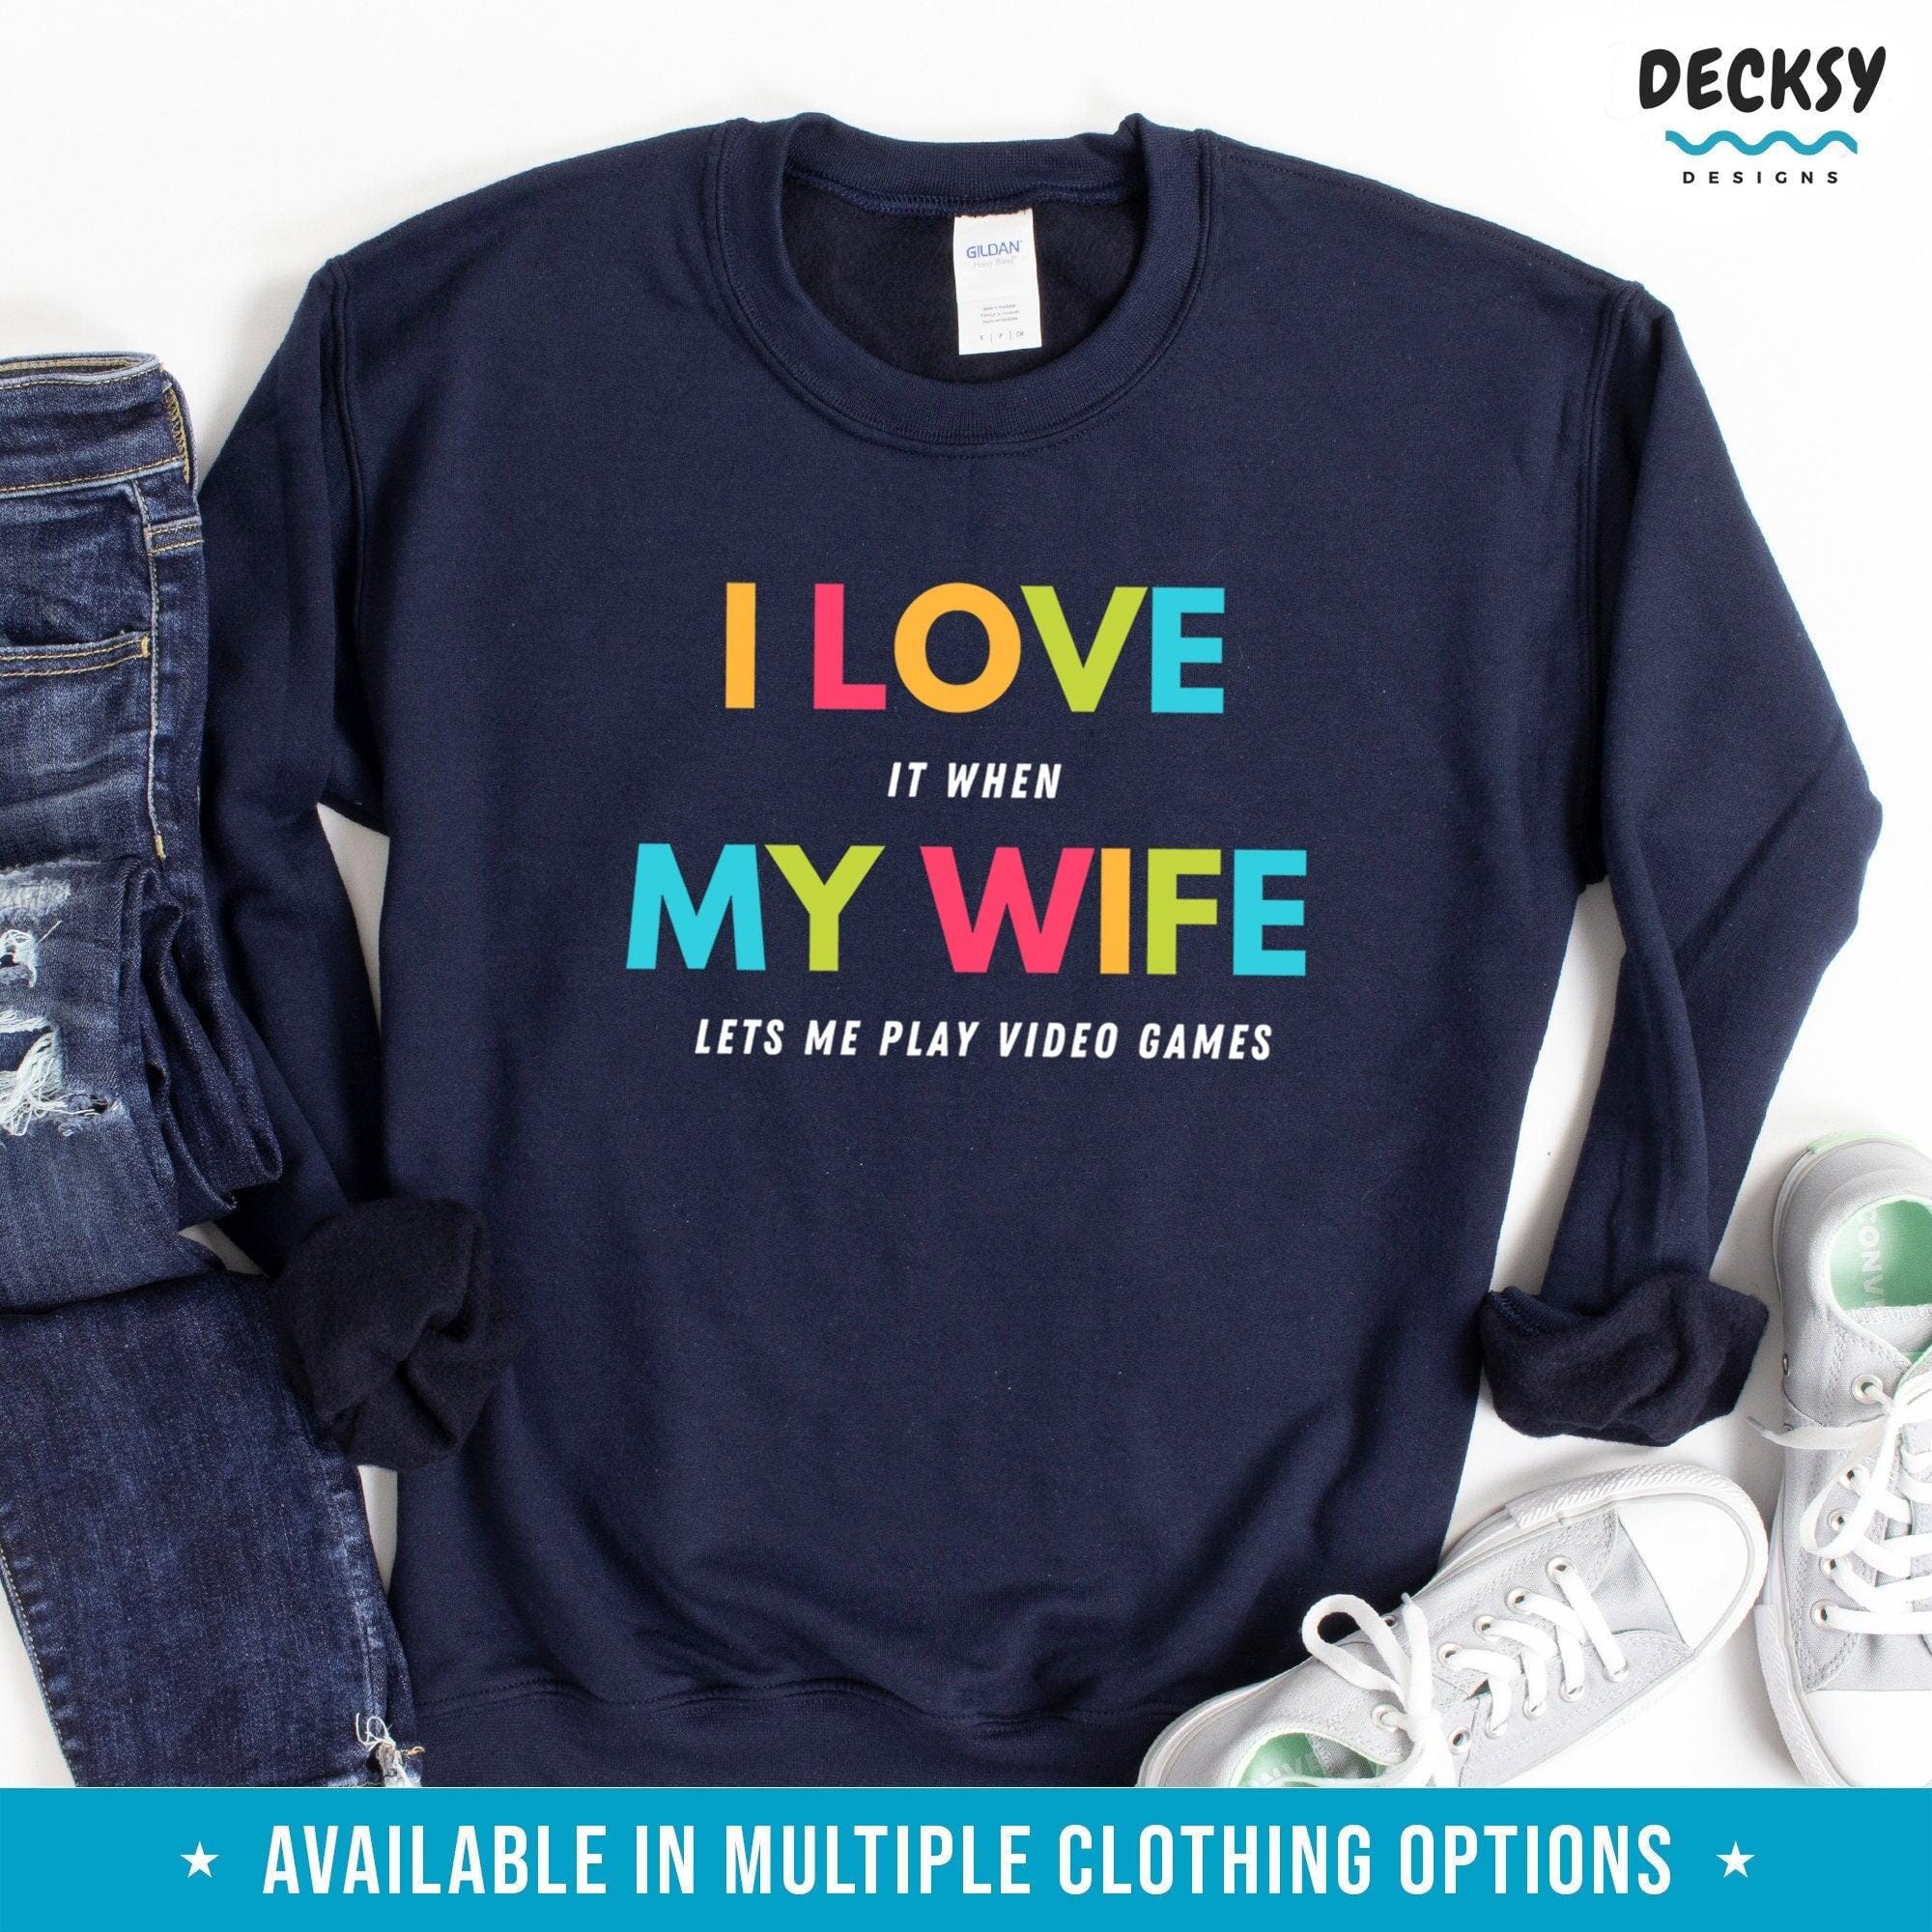 Video Gaming Shirt, Gamer Husband Gift from Wife-Clothing:Gender-Neutral Adult Clothing:Tops & Tees:T-shirts:Graphic Tees-DecksyDesigns